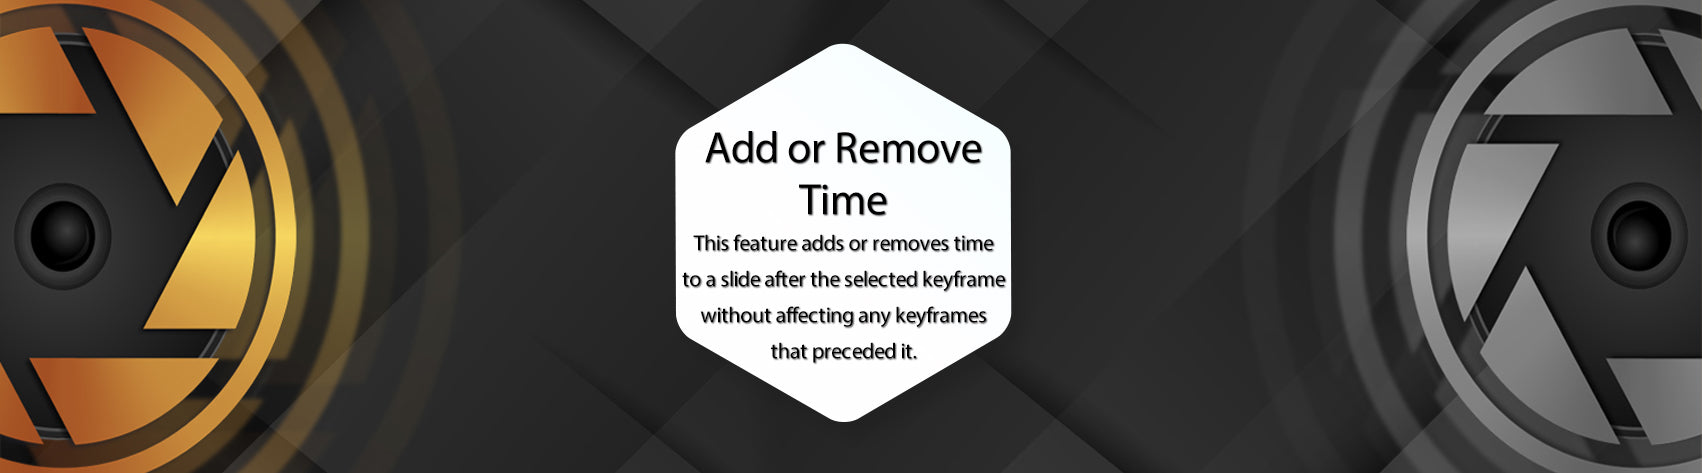 Add or Remove Time from a Slide